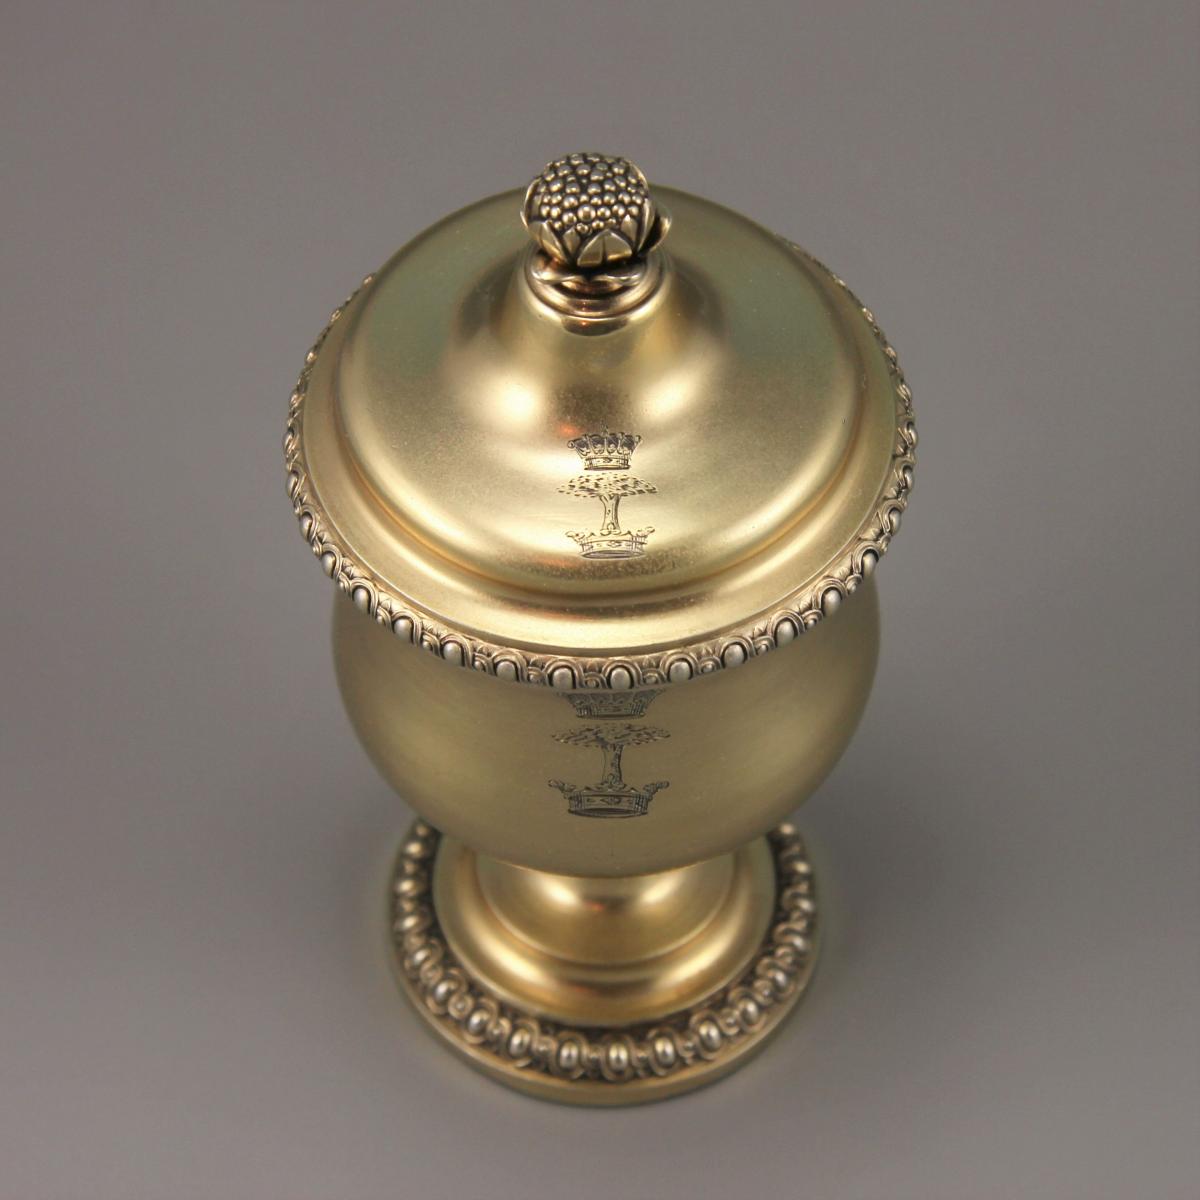 GEORGE II Silver Gilt Spice Vase and Cover. Circa 1750